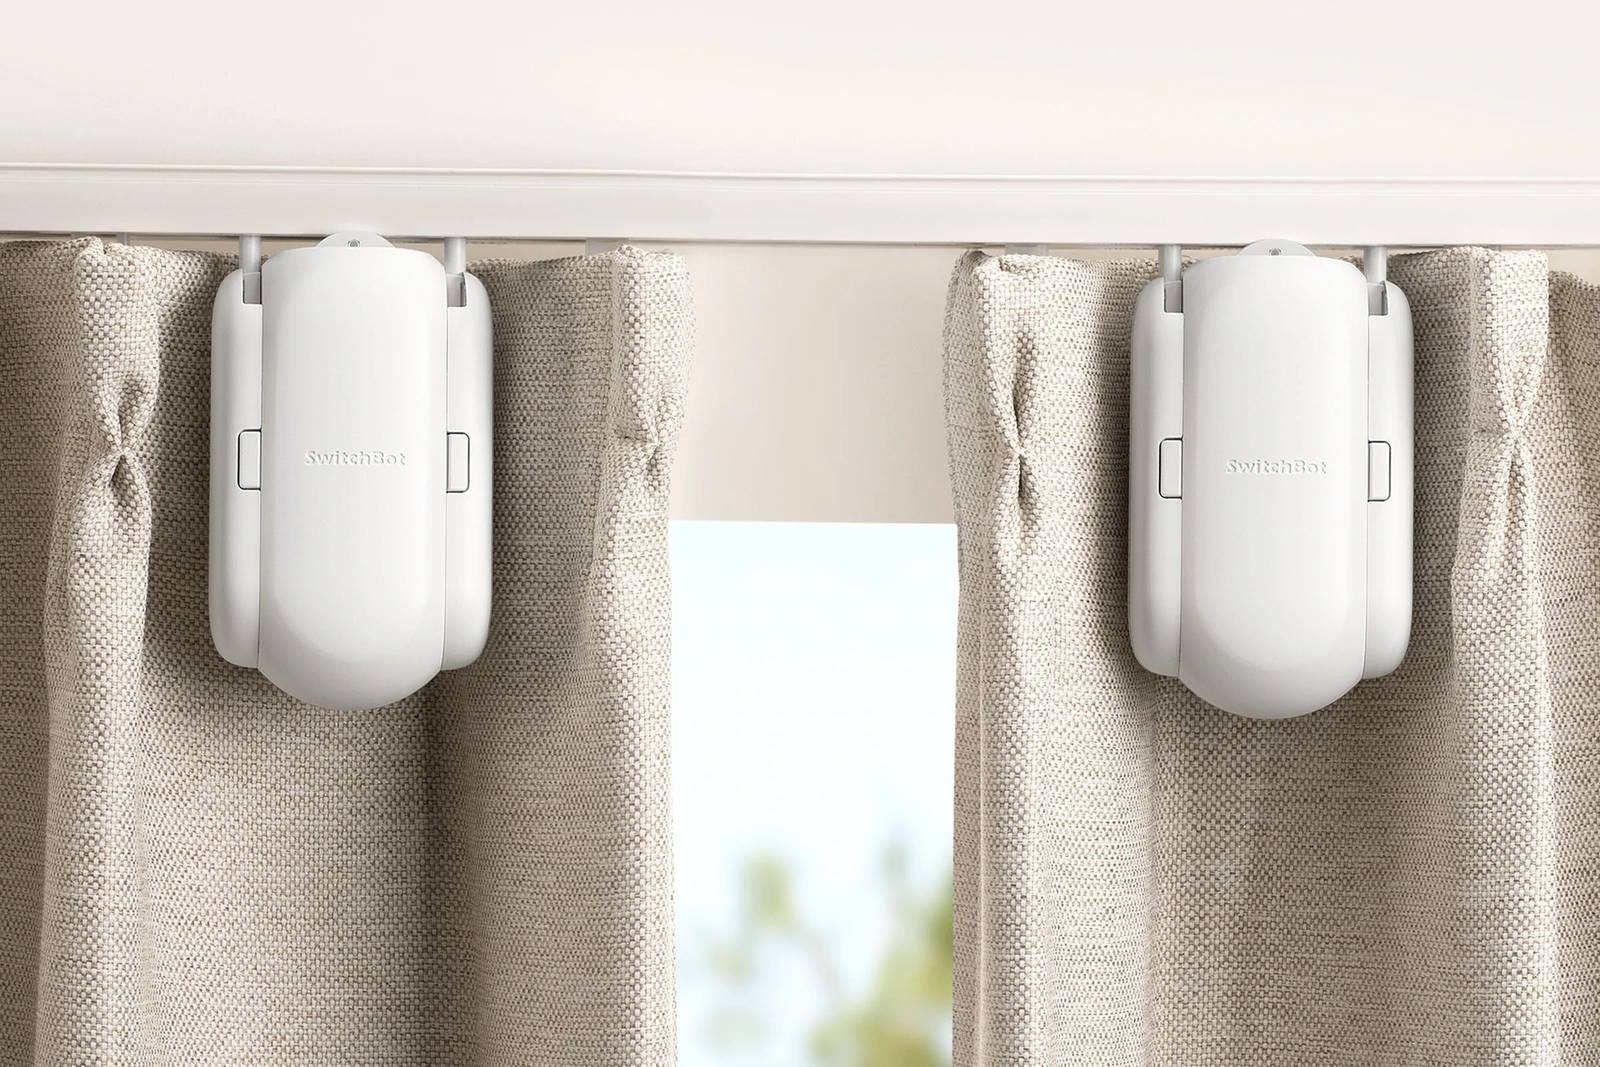 The SwitchBot smart device pictured on a curtain